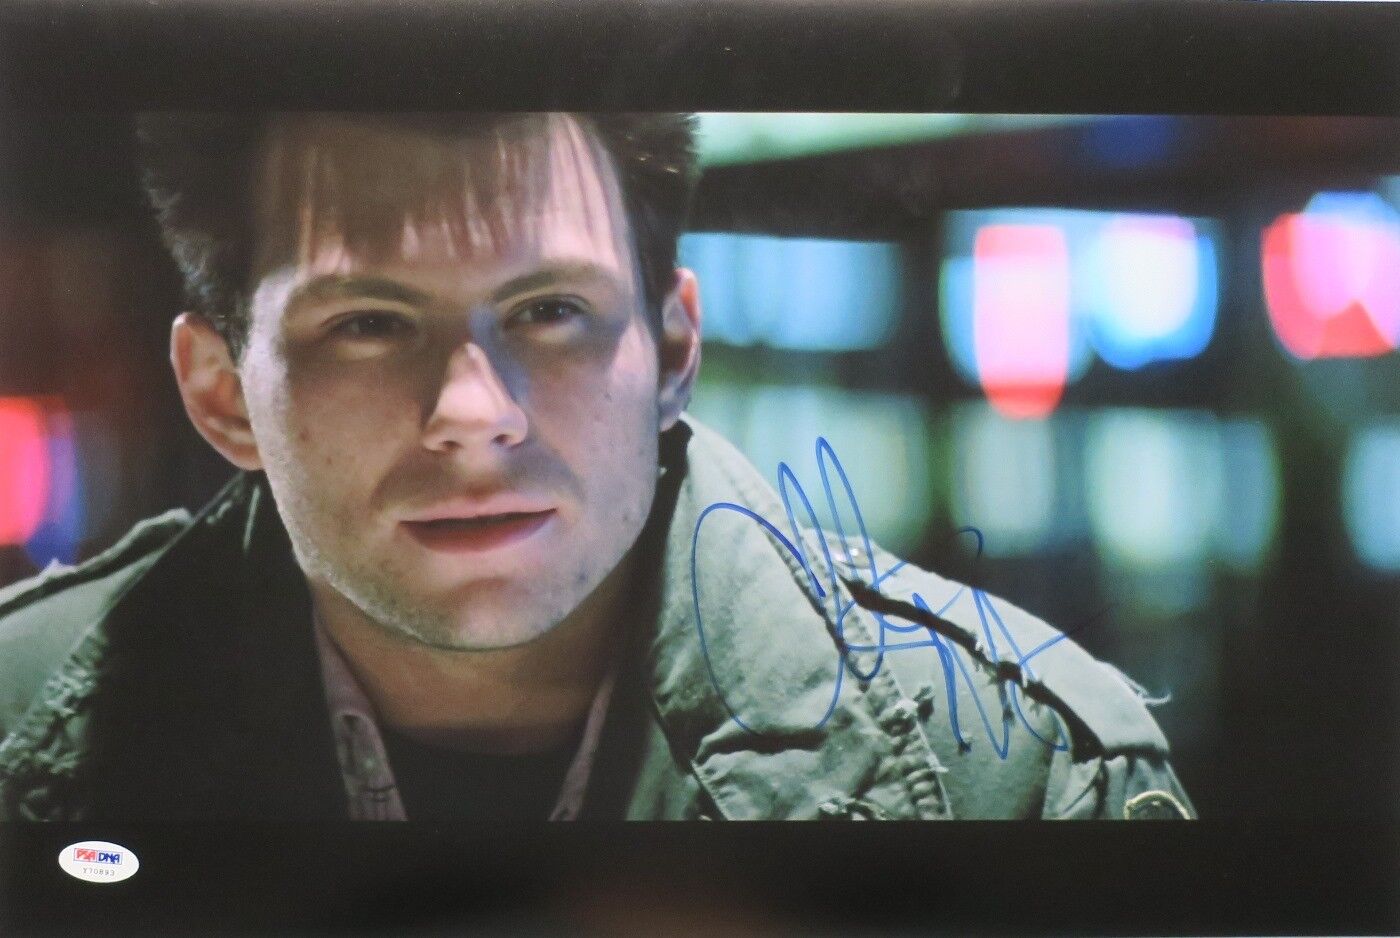 Christian Slater Signed True Romance Autographed 12x18 Photo Poster painting PSA/DNA #Y70893